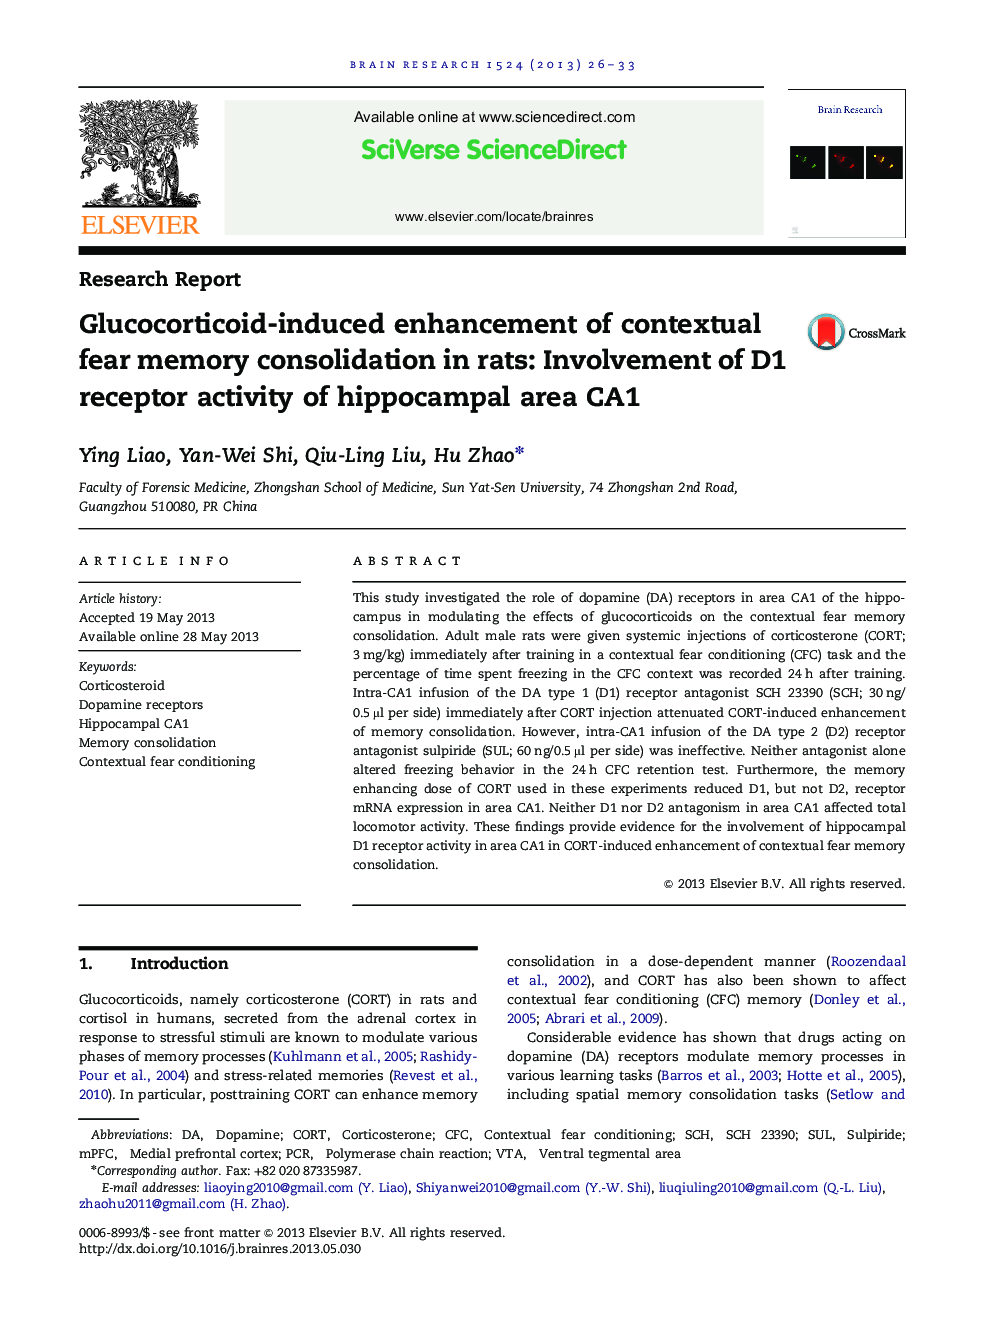 Glucocorticoid-induced enhancement of contextual fear memory consolidation in rats: Involvement of D1 receptor activity of hippocampal area CA1